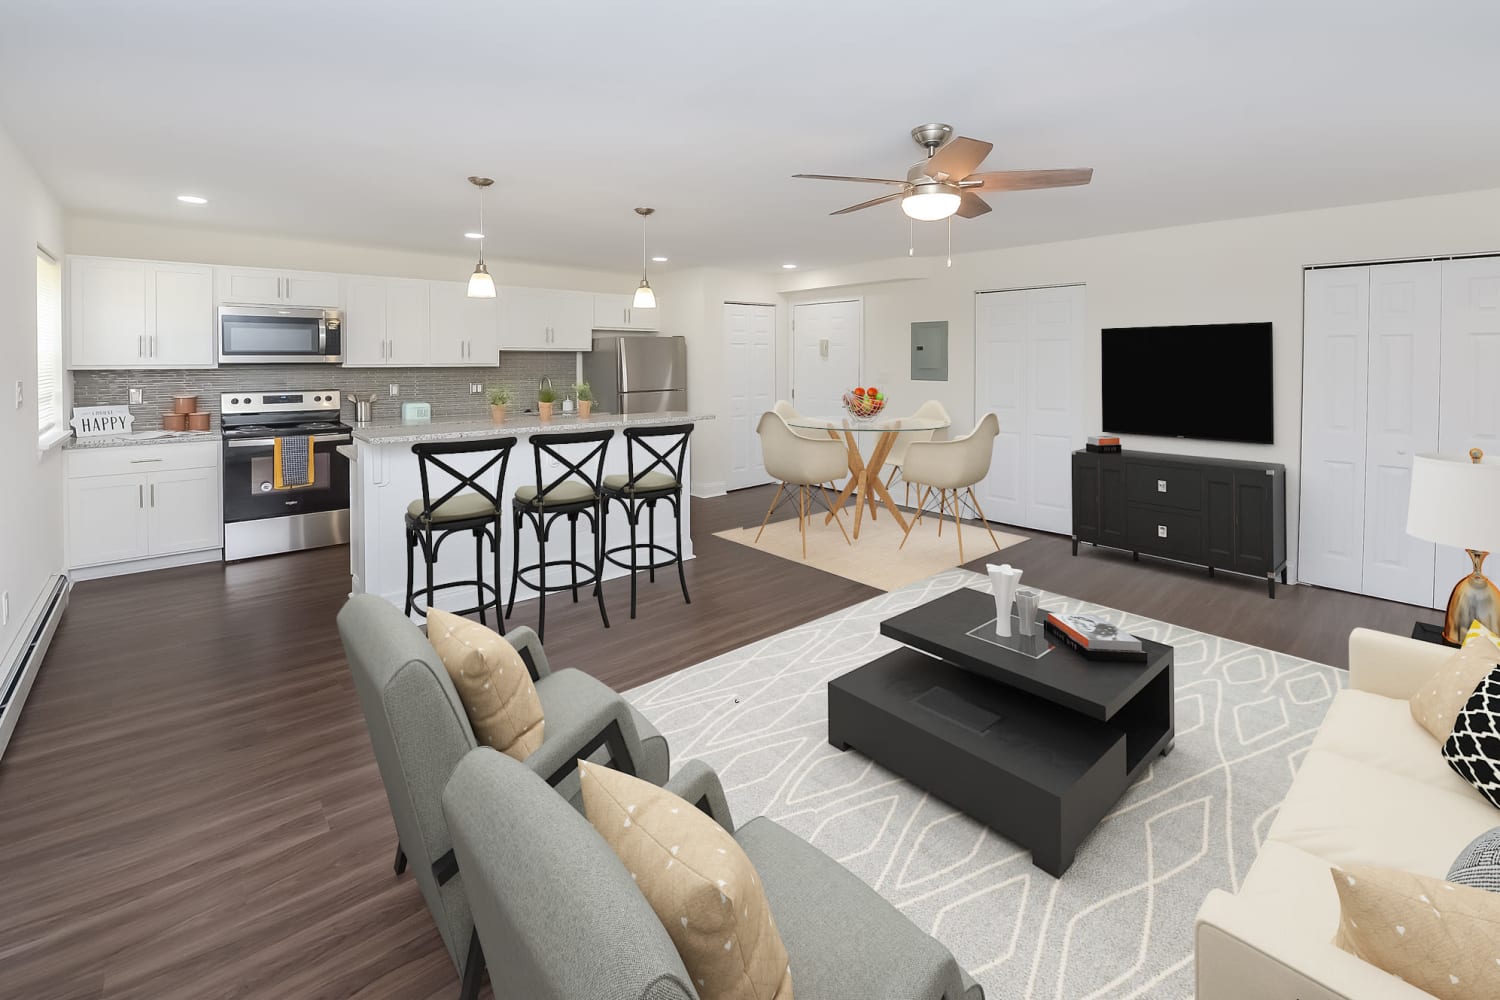 Beautiful open layout model home with vinyl plank flooring at Kingswood Apartments & Townhomes in King of Prussia, Pennsylvania